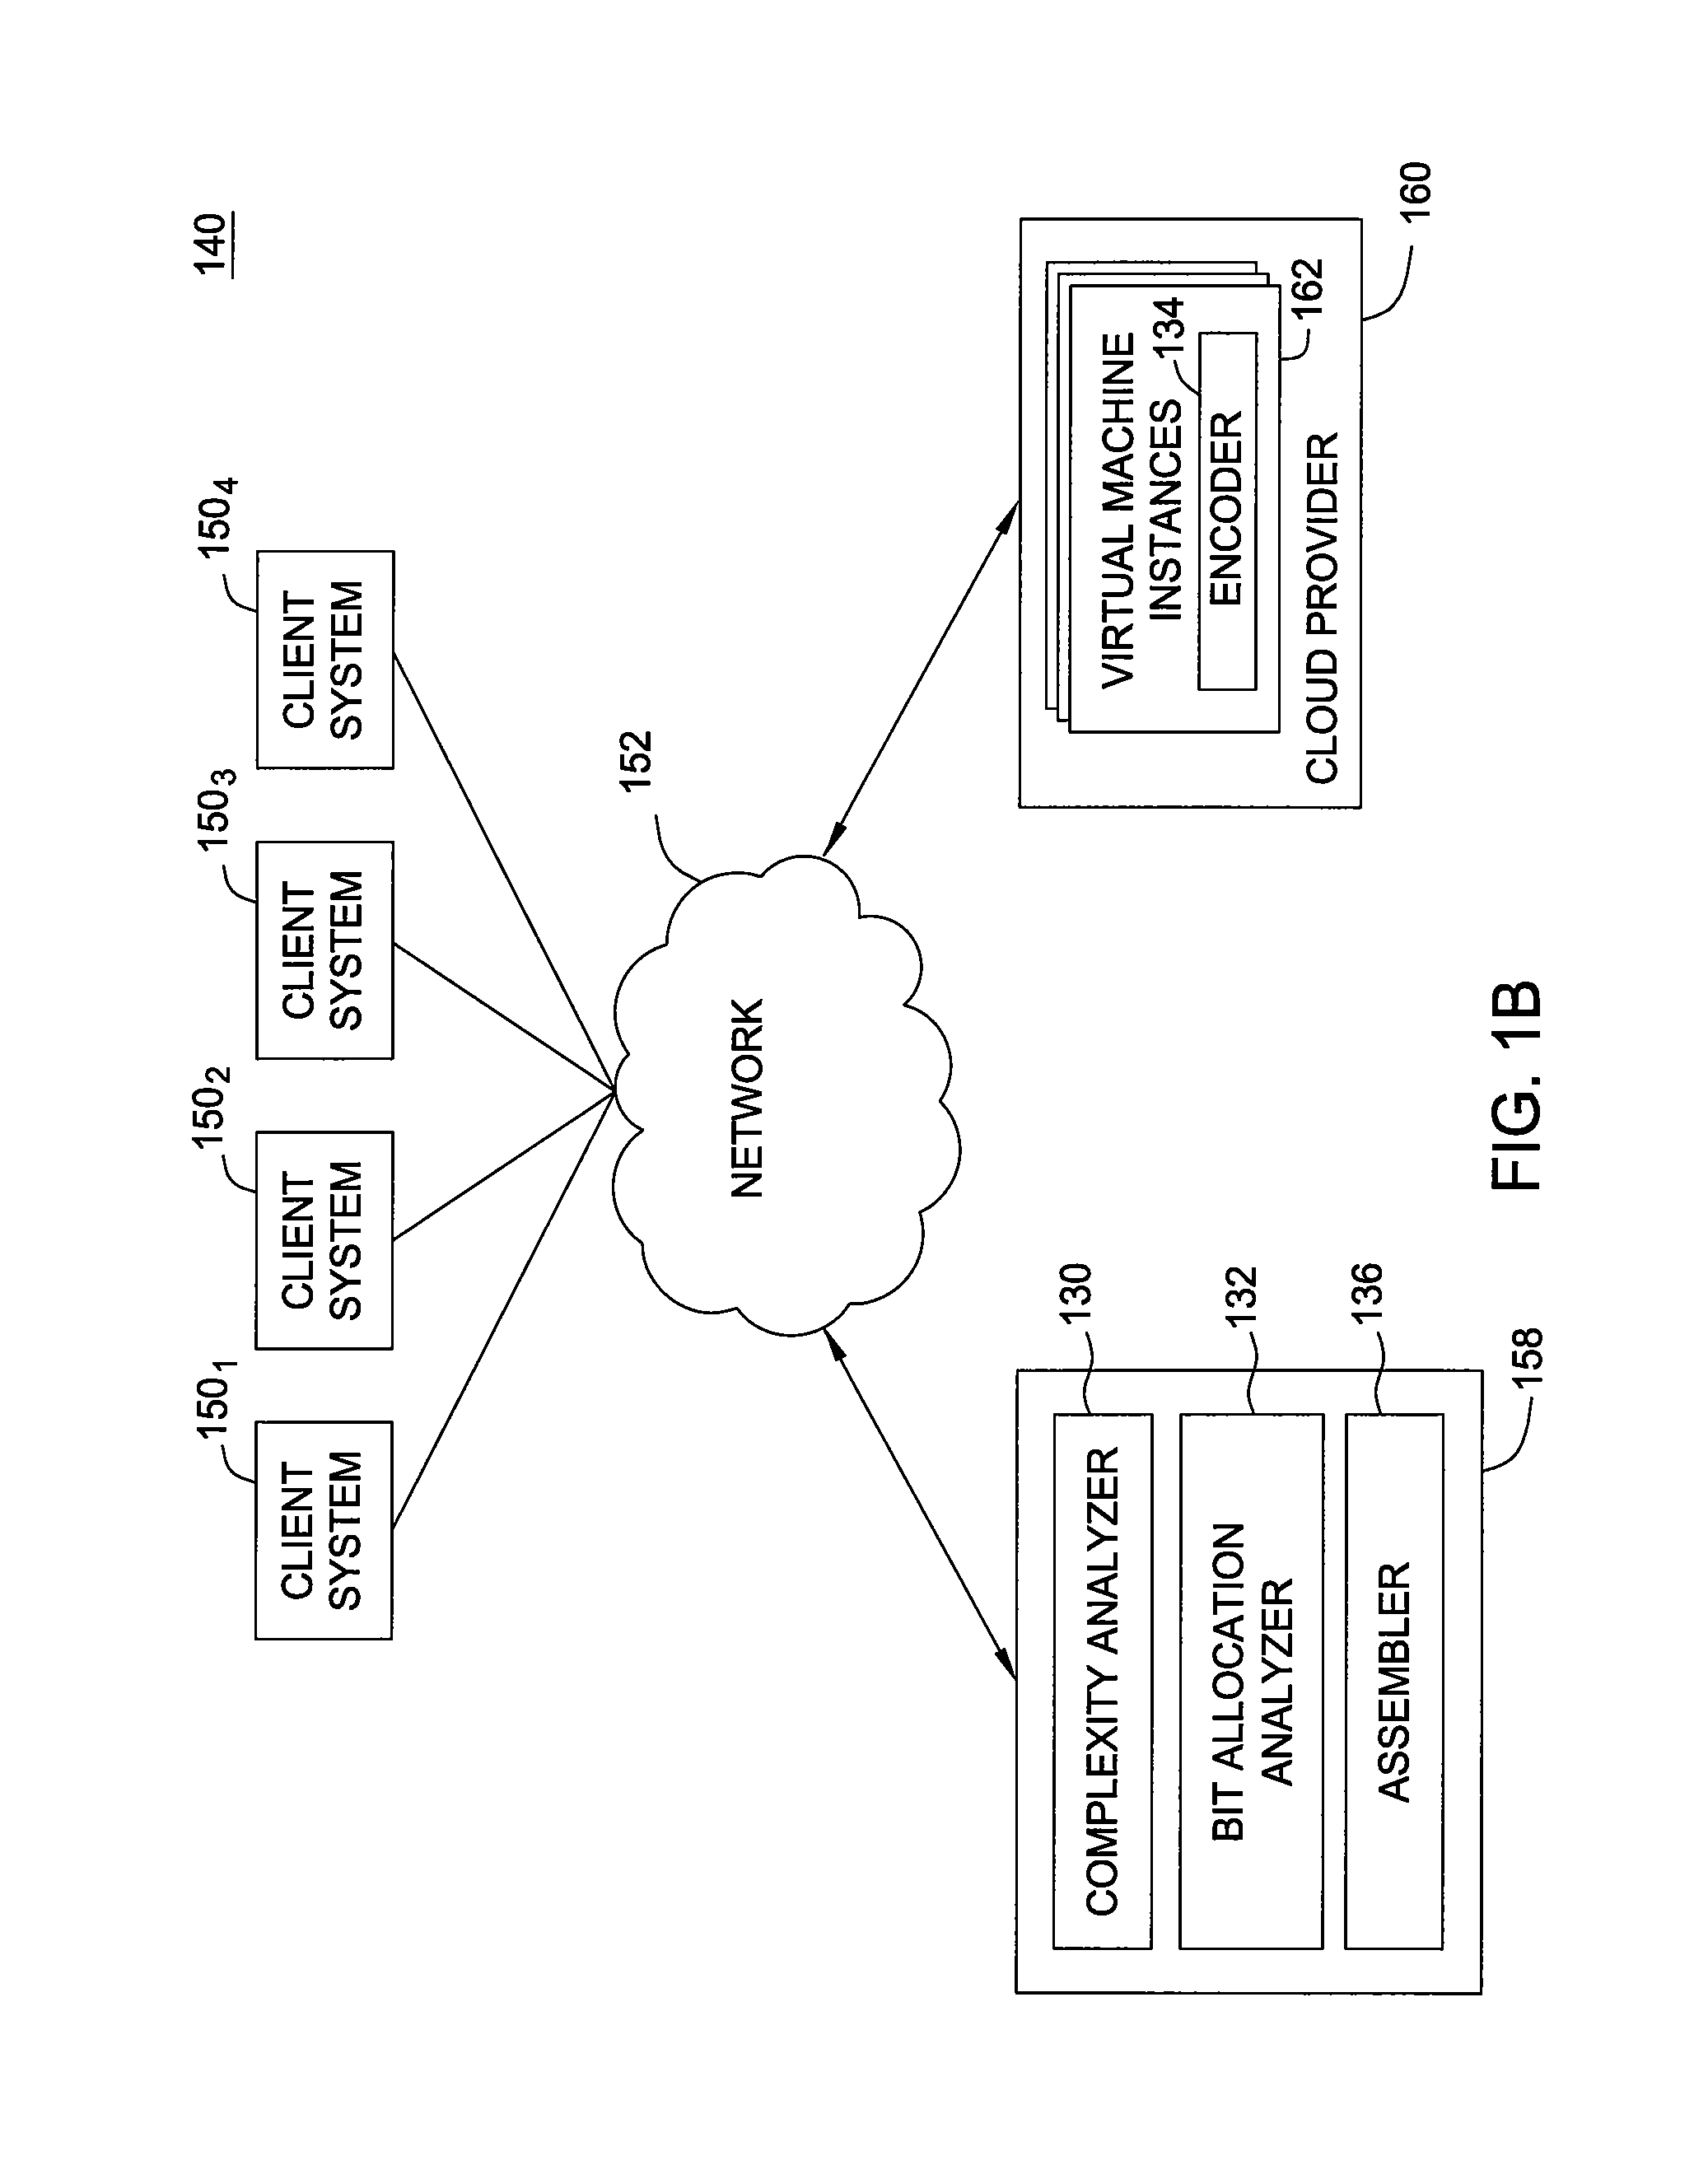 Parallel video encoding based on complexity analysis